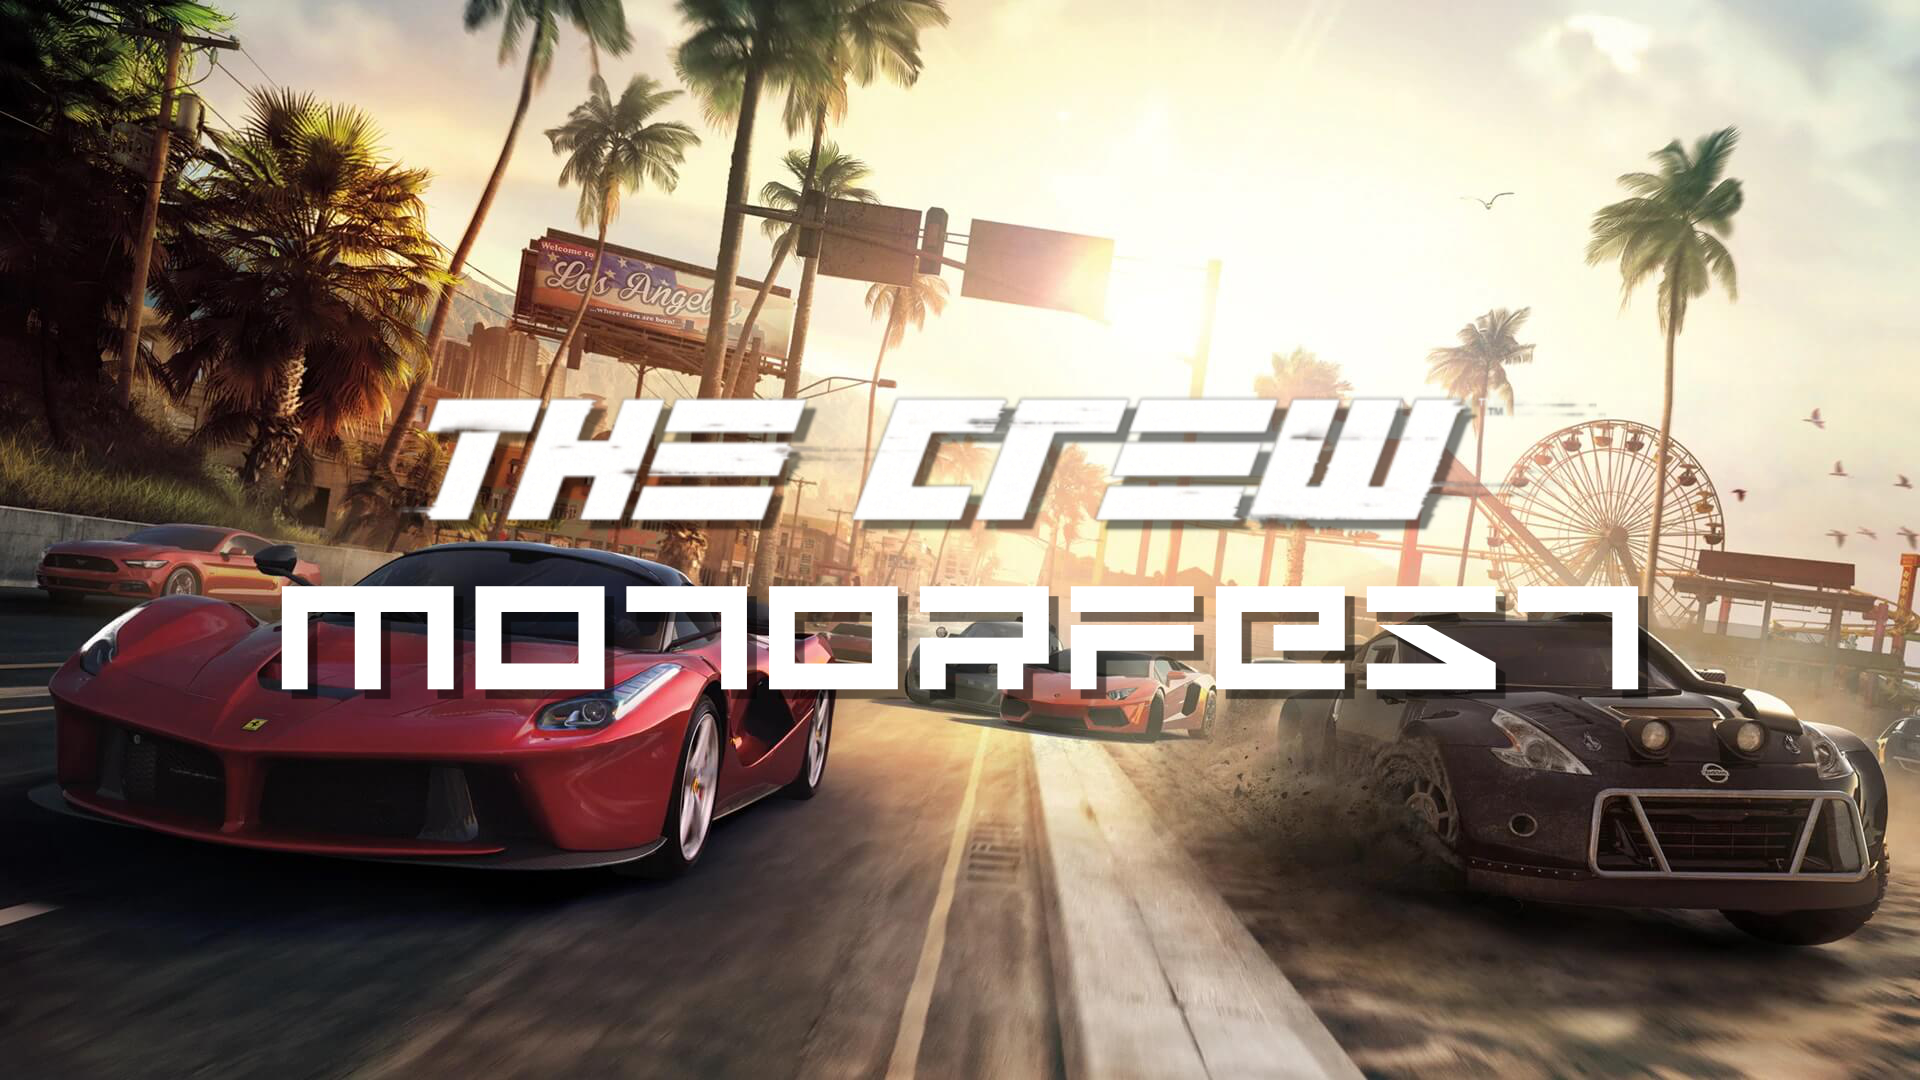 The Crew Motorfest System Requirements - Explained 